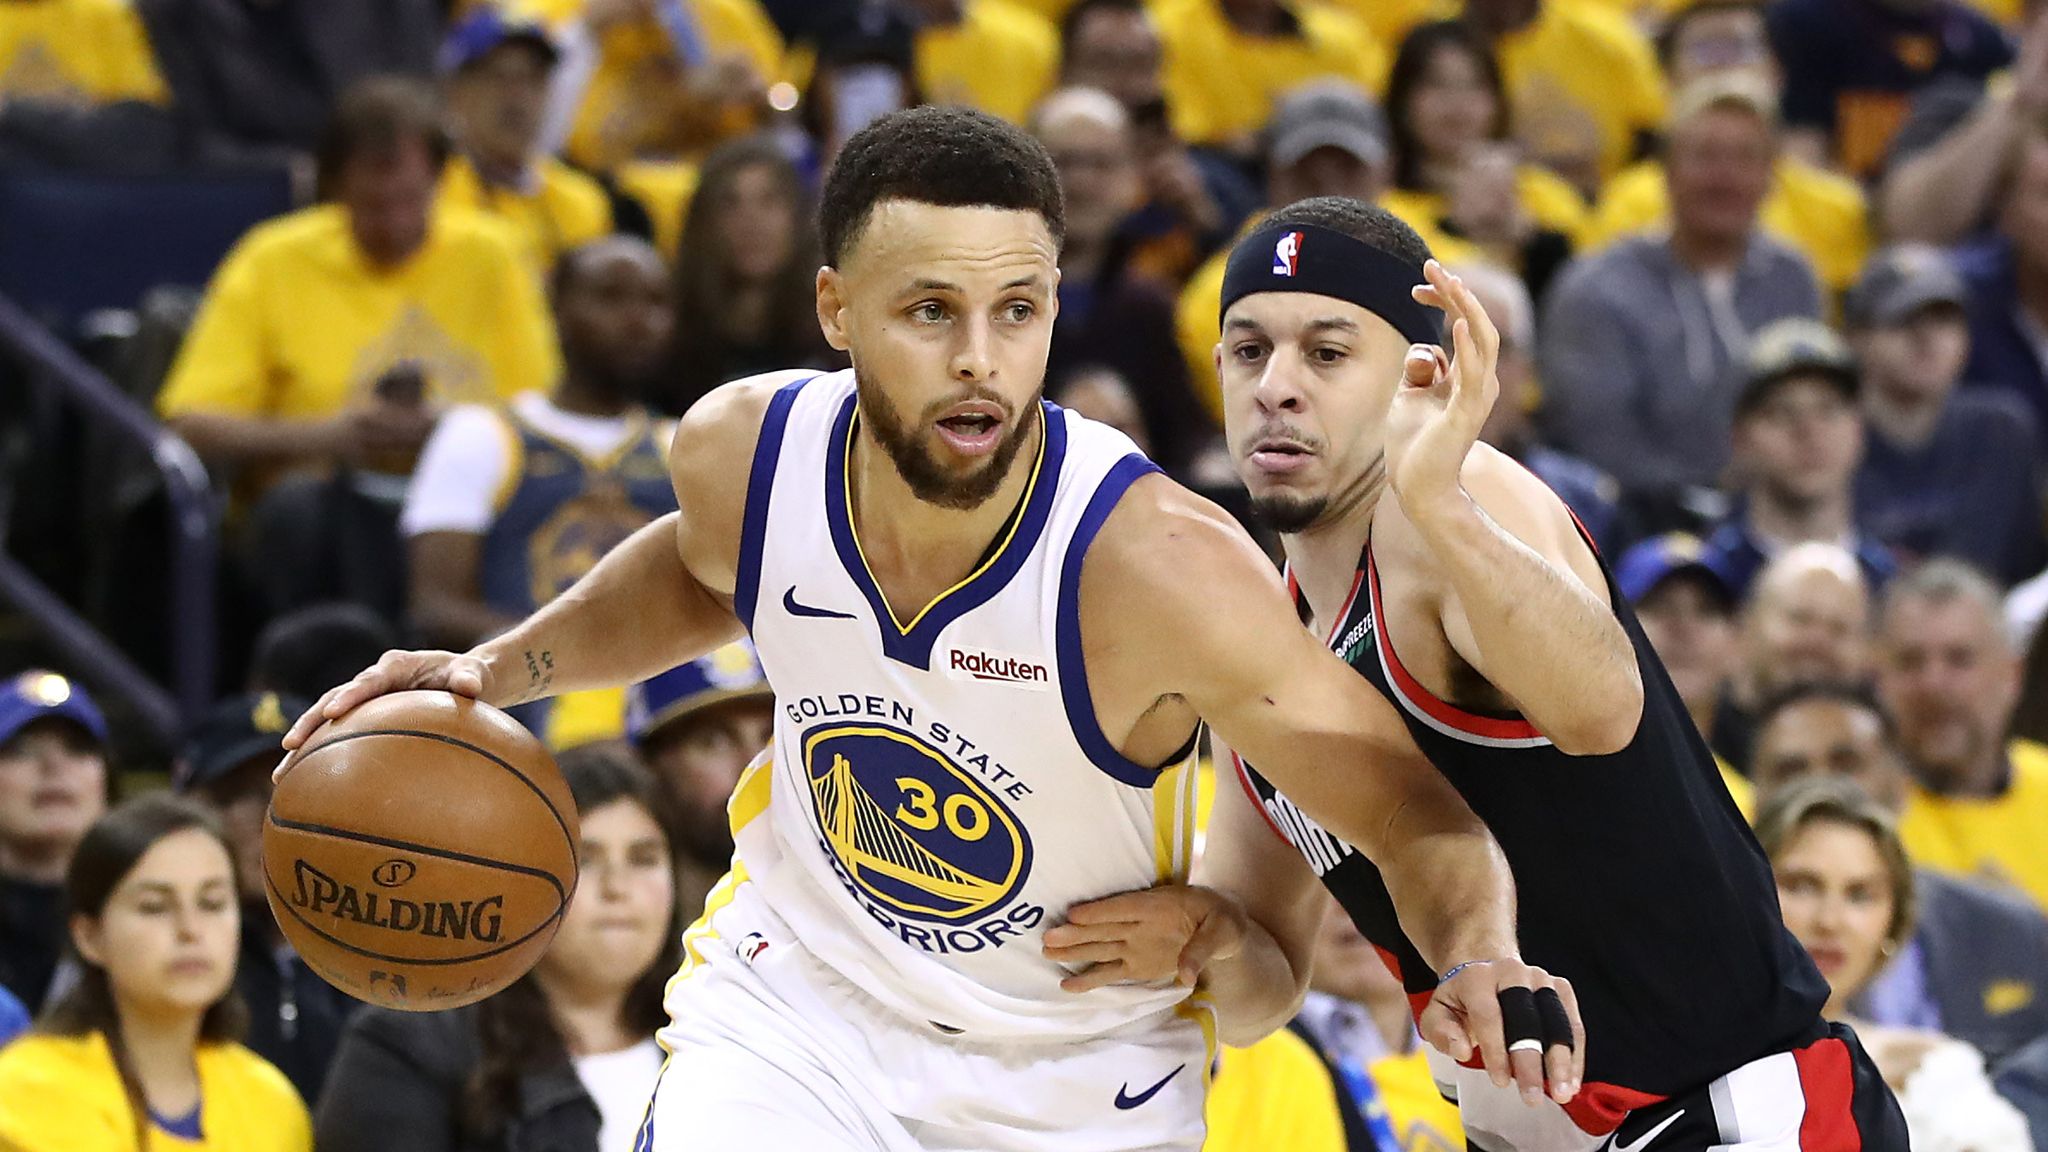 Photos: Stephen Curry dominates brother's team in Game 1